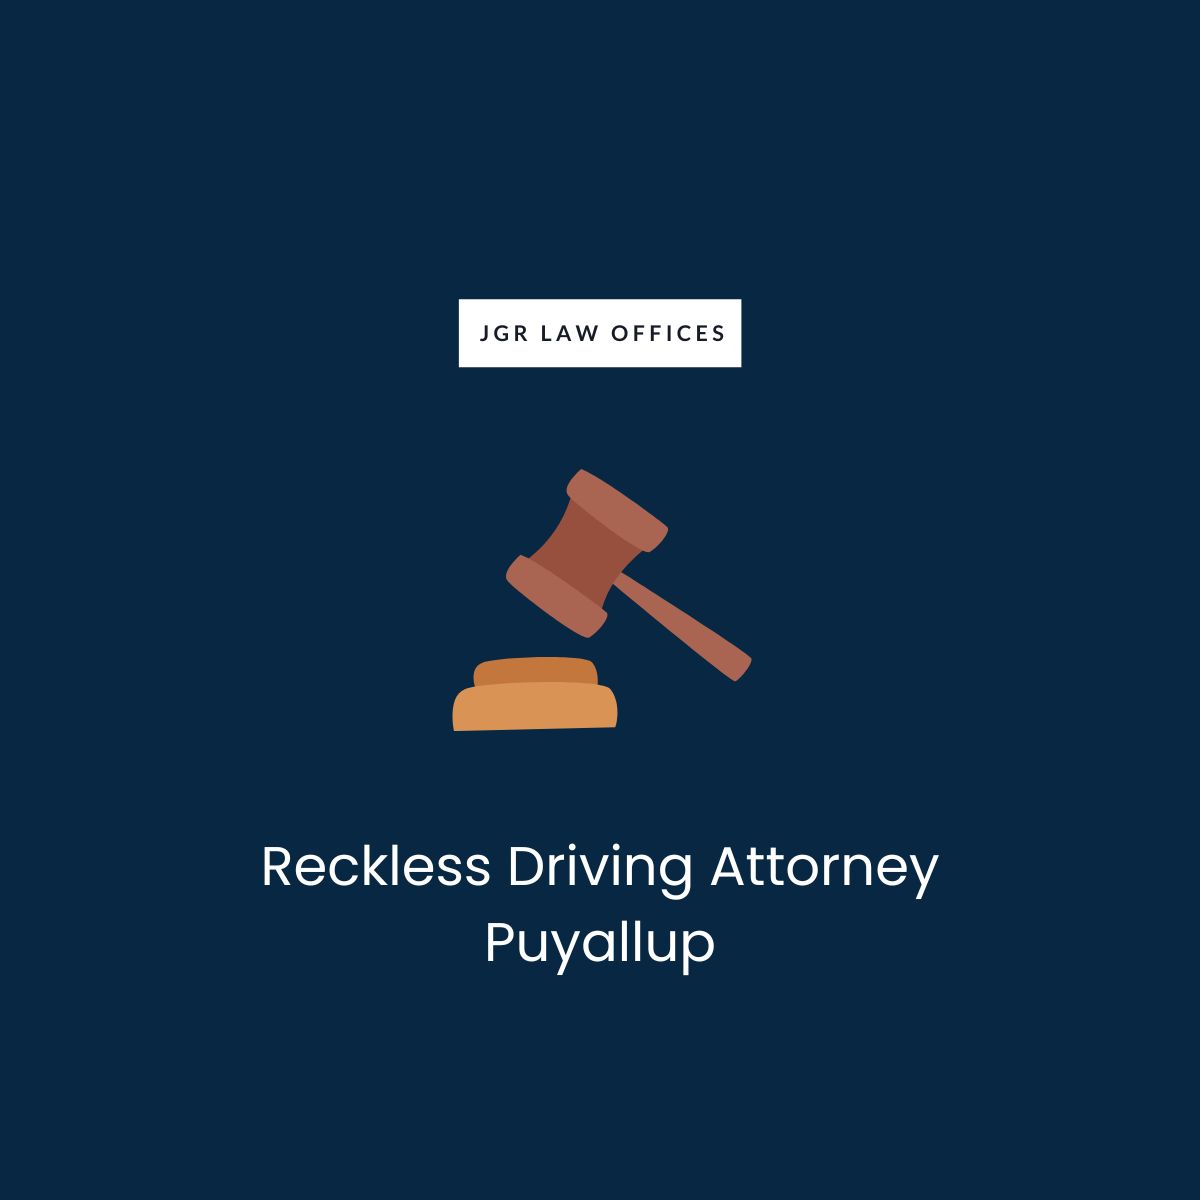 Reckless Driving Attorney Puyallup